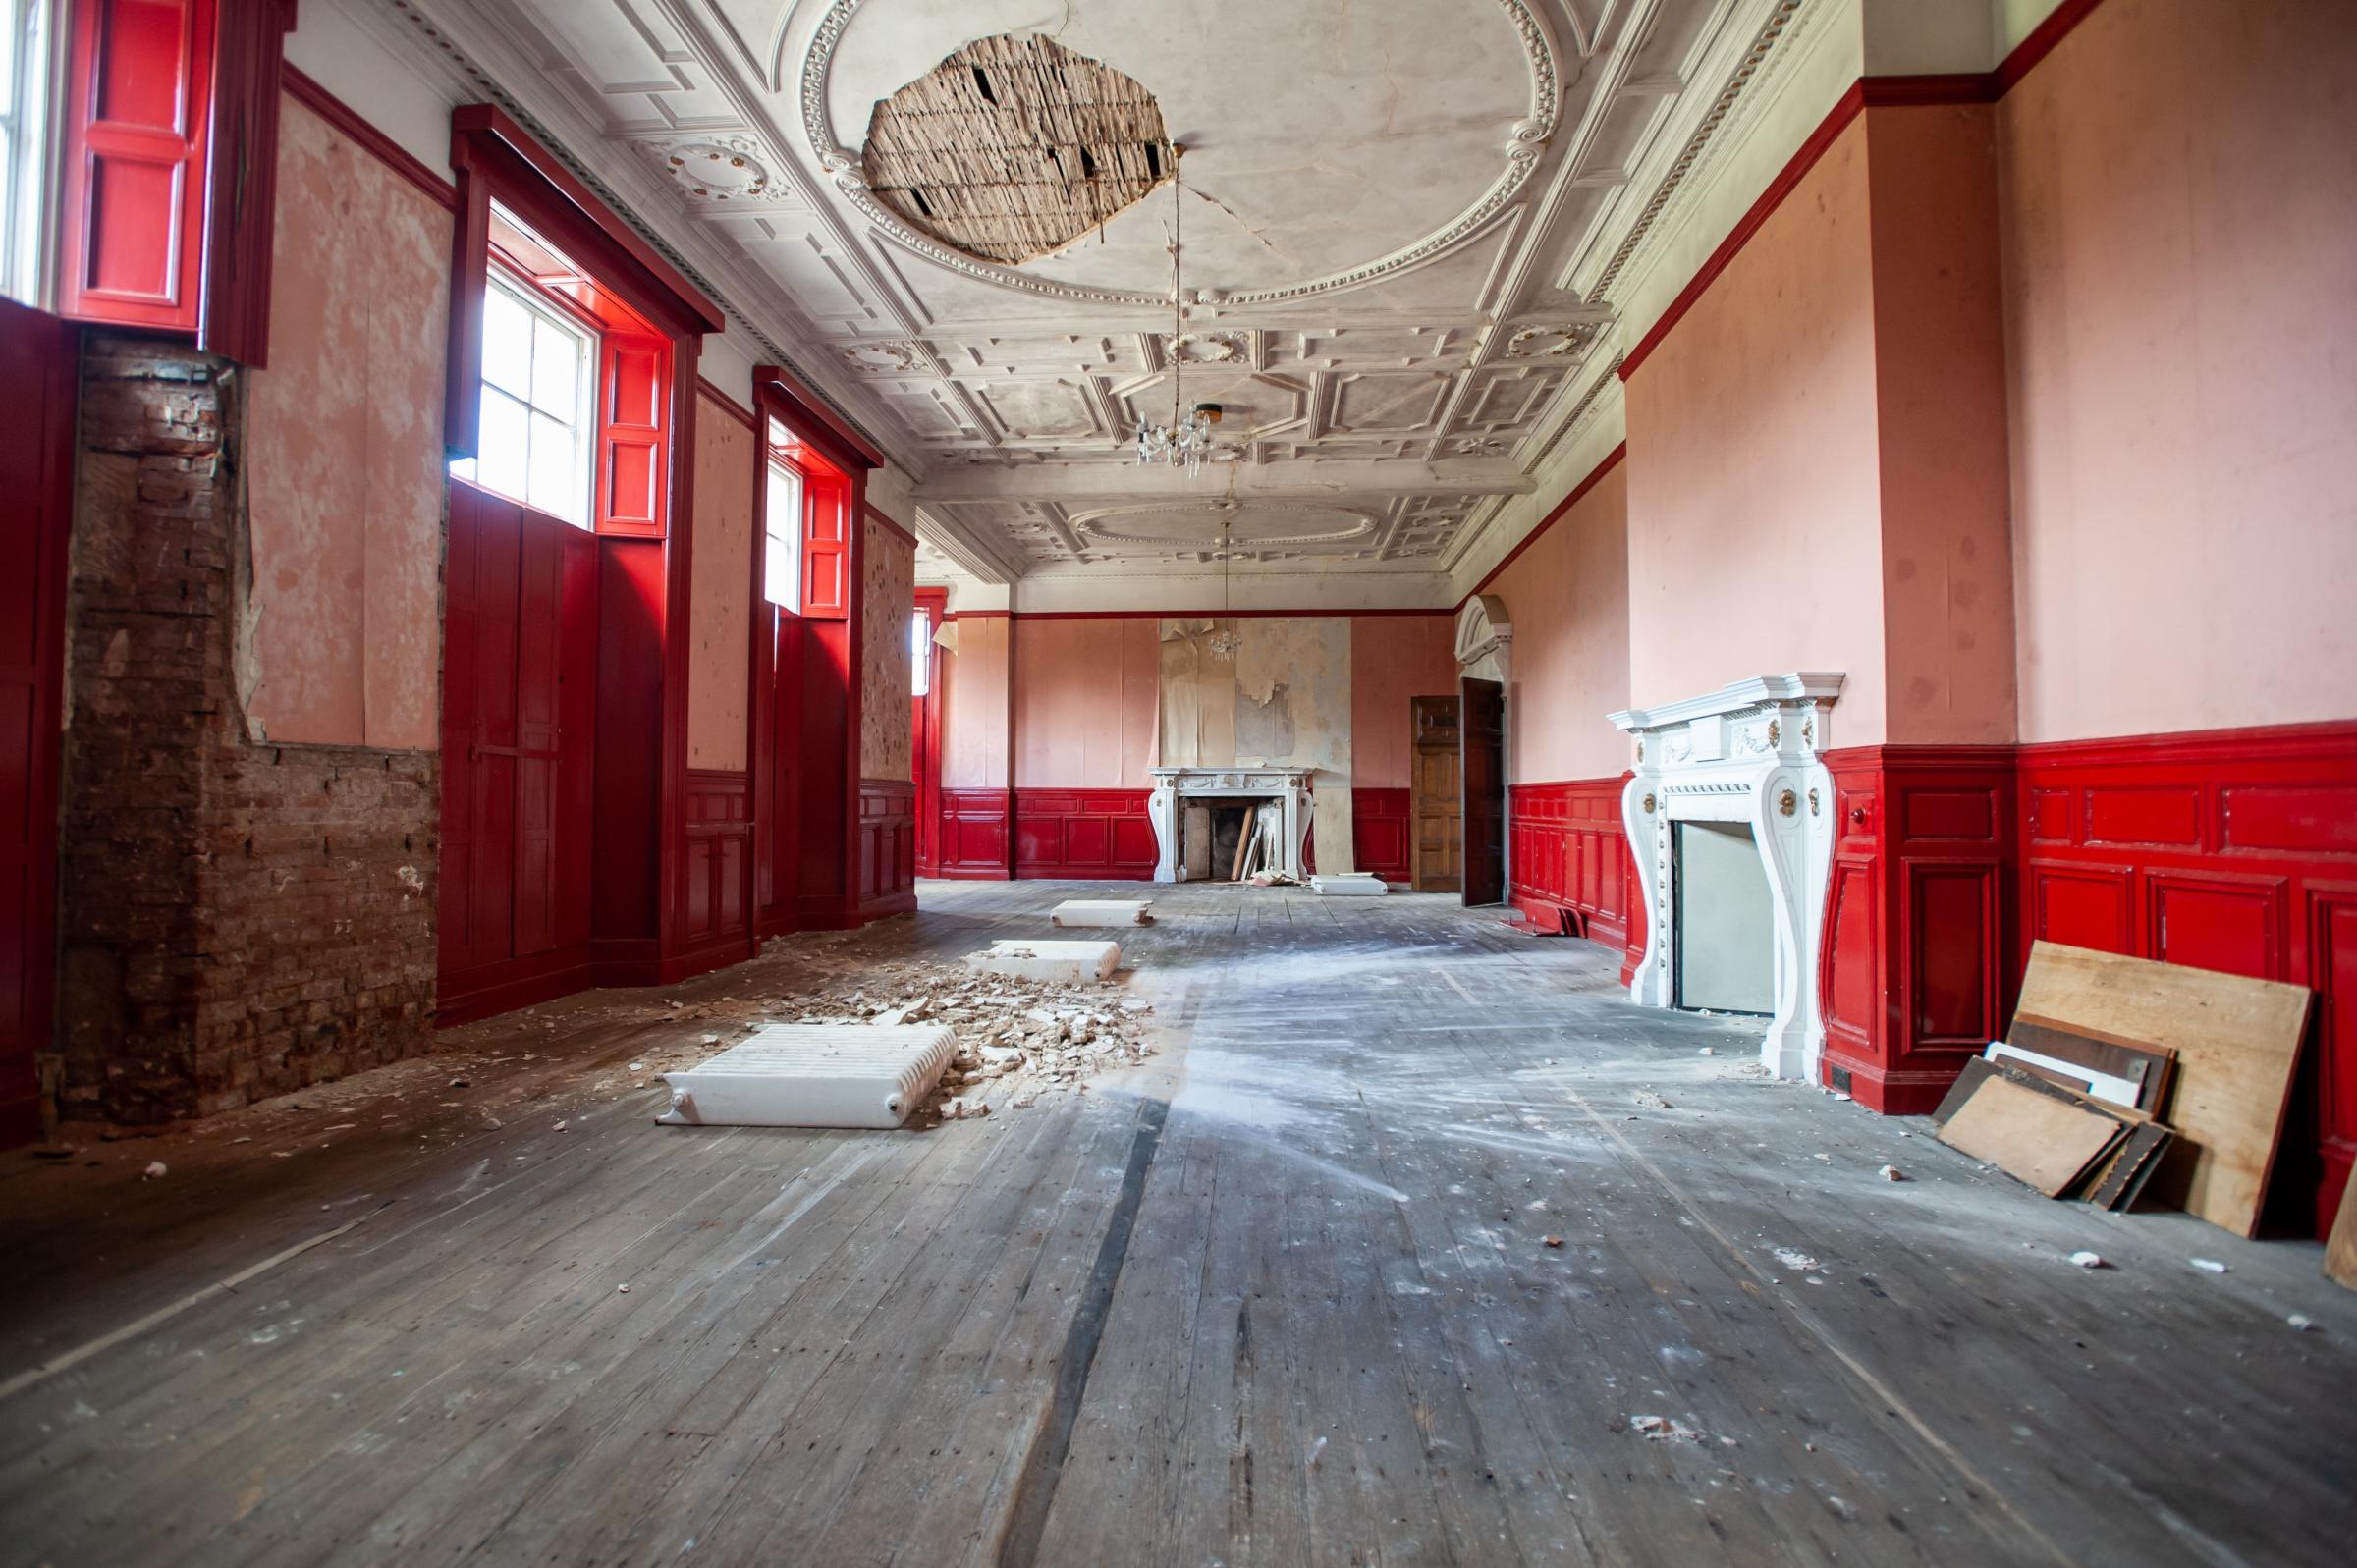 Kinmel Hall has been unoccupied since 2000. Picture: Permissiong granted by Allsop